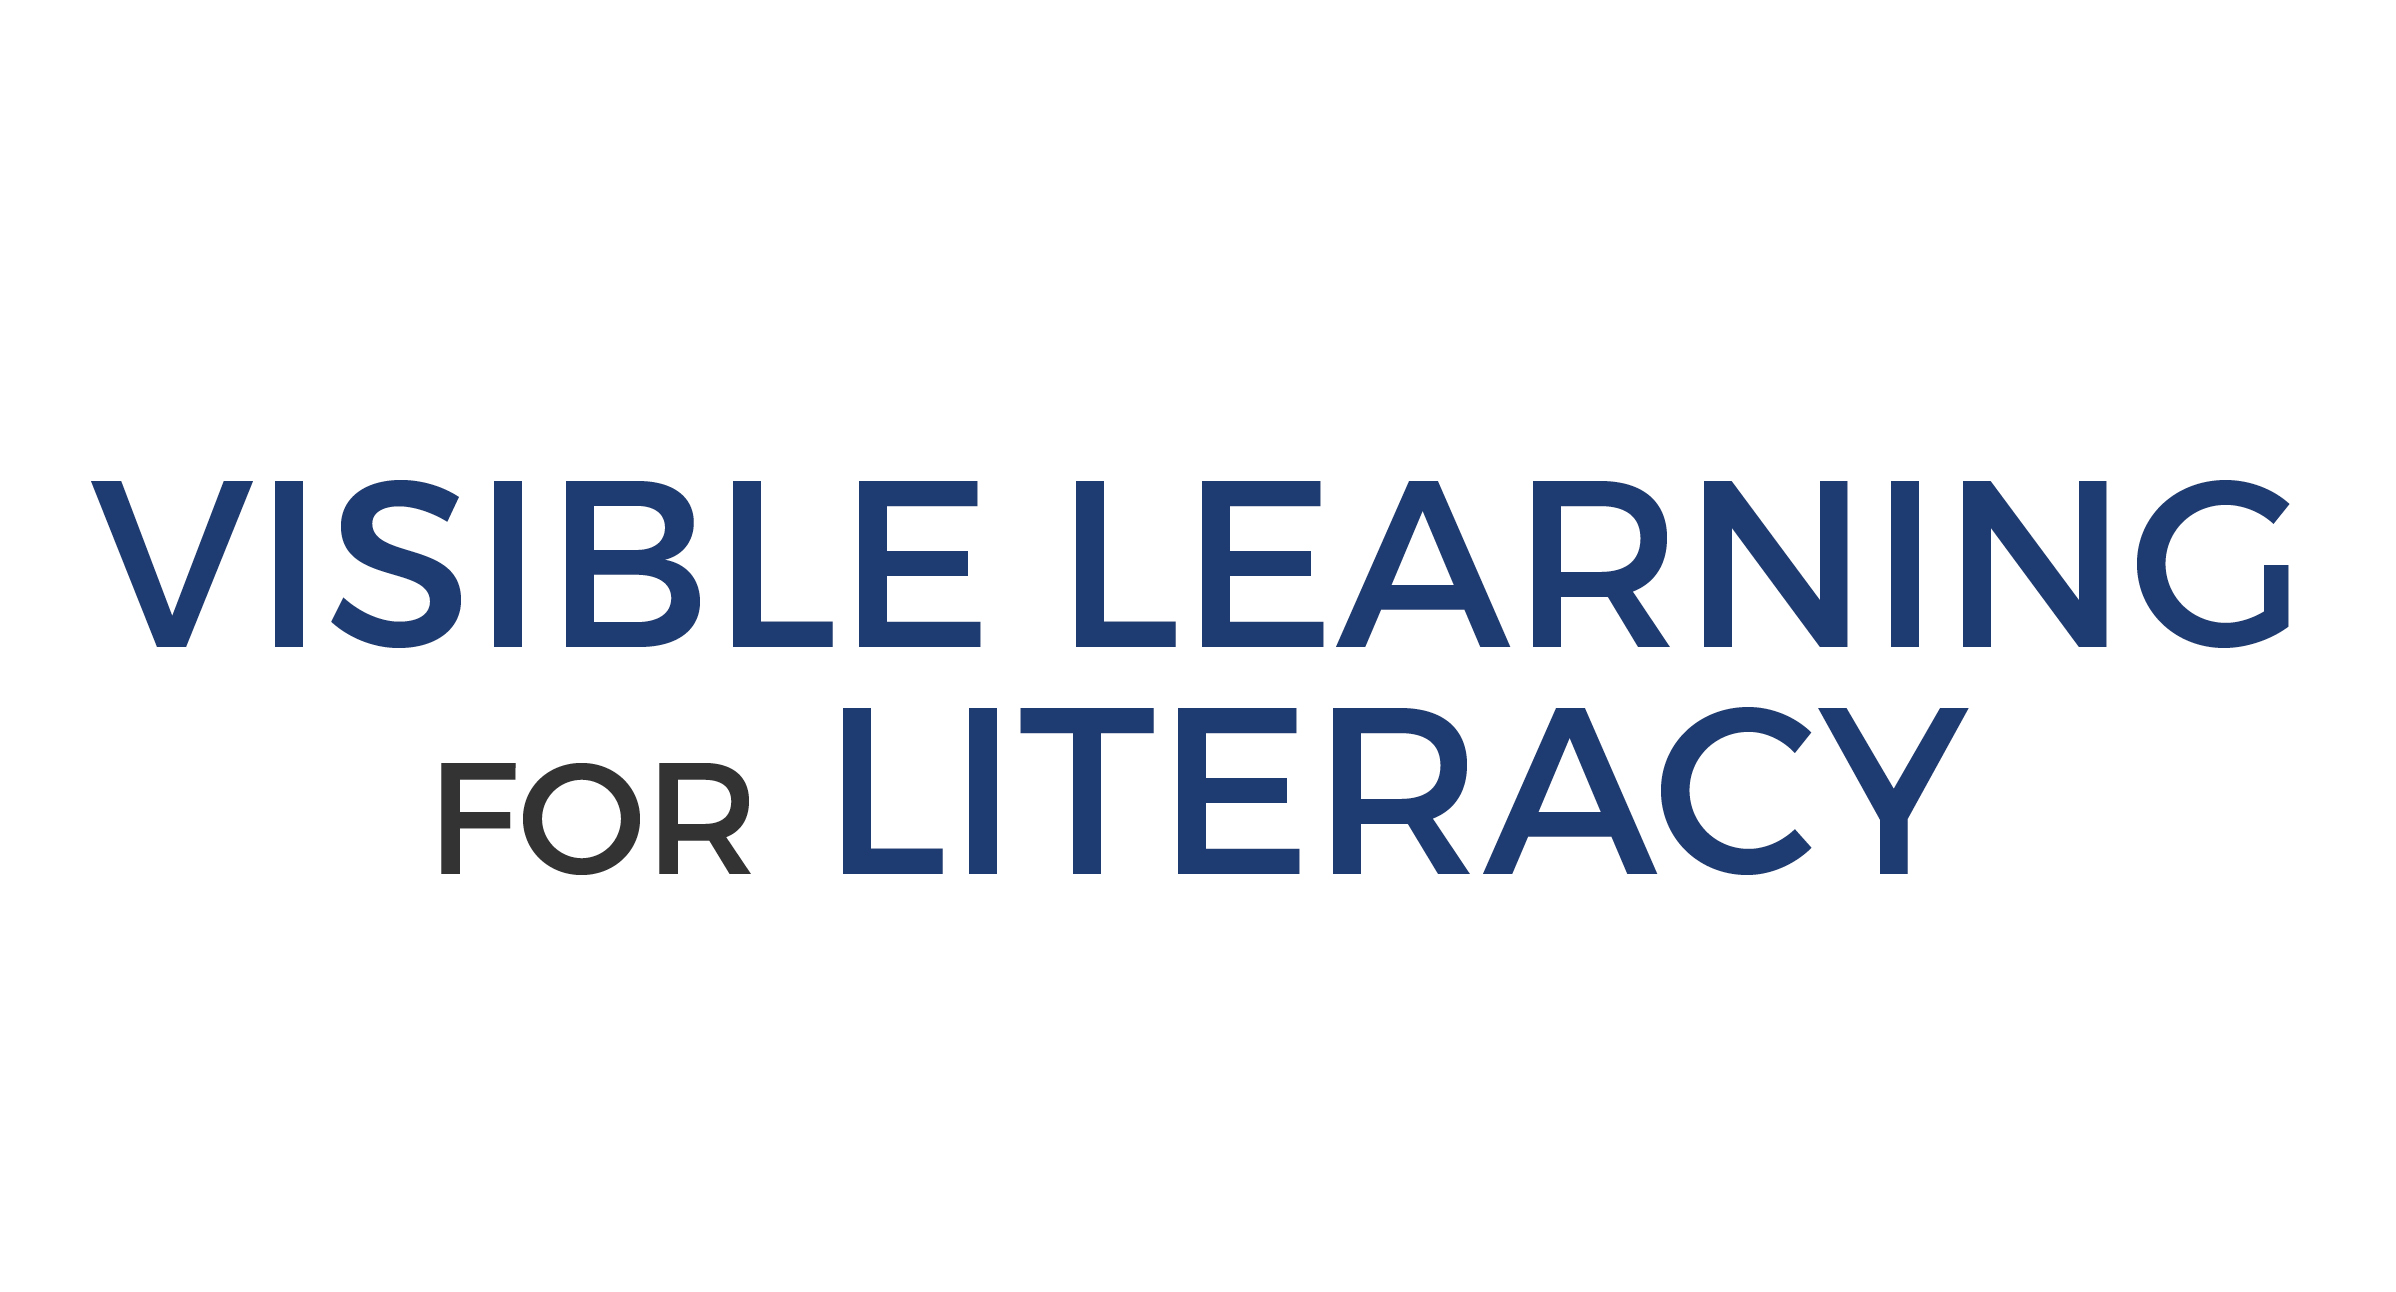 VISIBLE LEARNING FOR LITERACY: Sydney